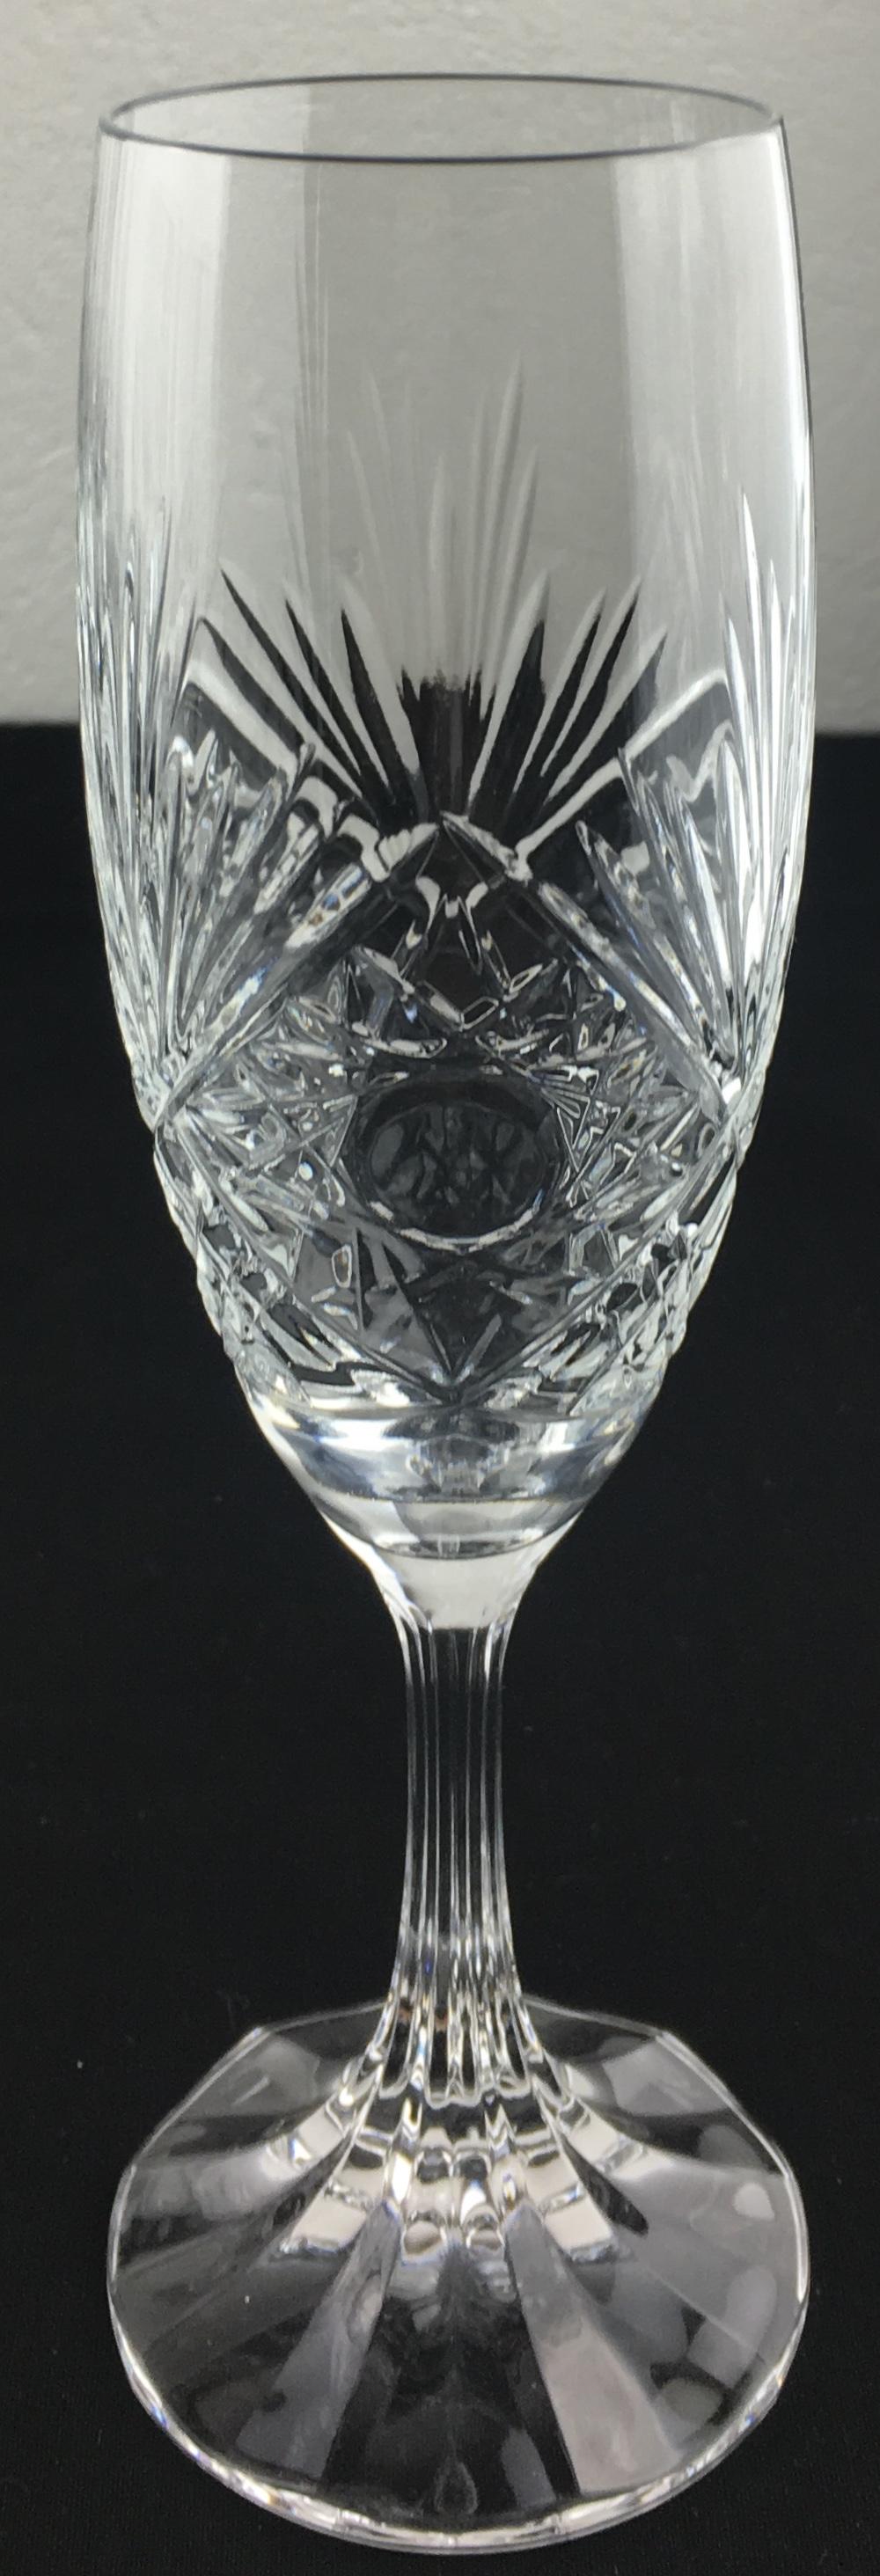 French Exquisite 12 Piece Baccarat Crystal Champagne Flutes